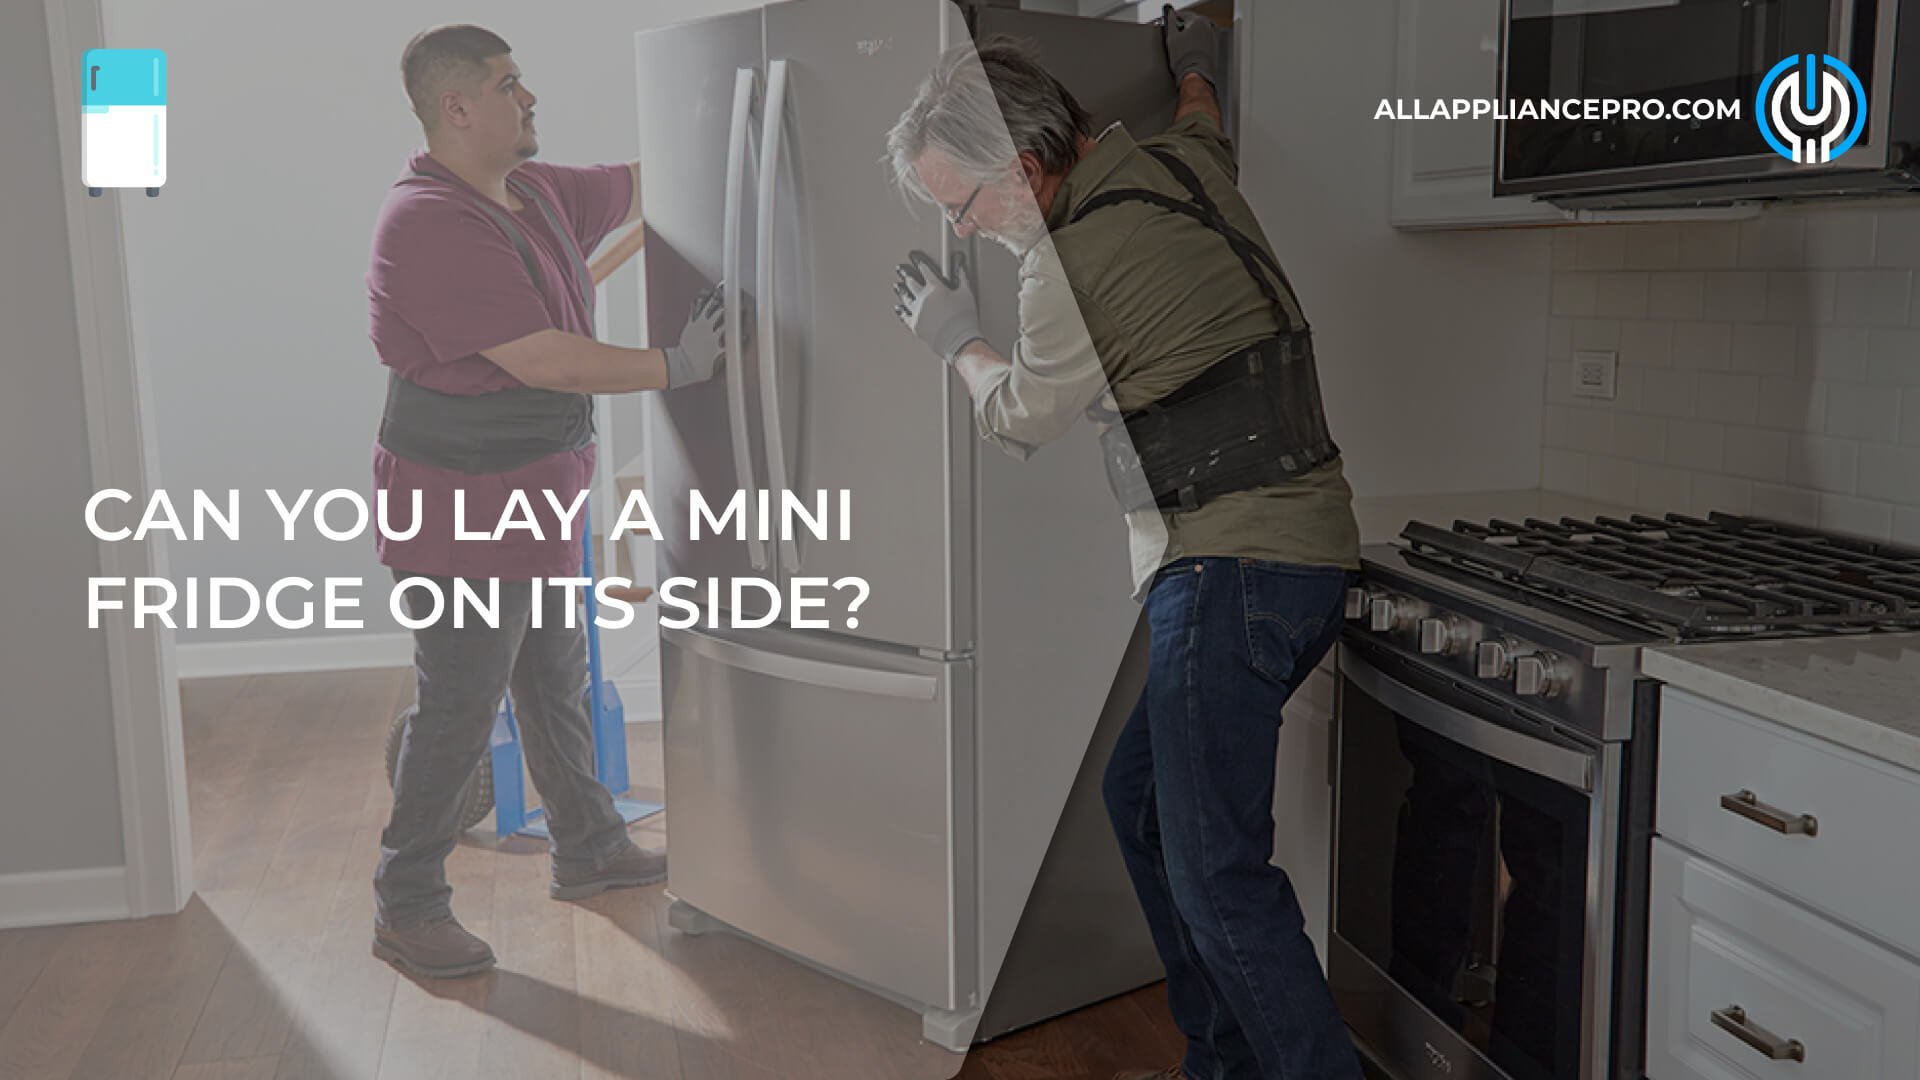 Can You Lay a Mini Fridge on Its Side?